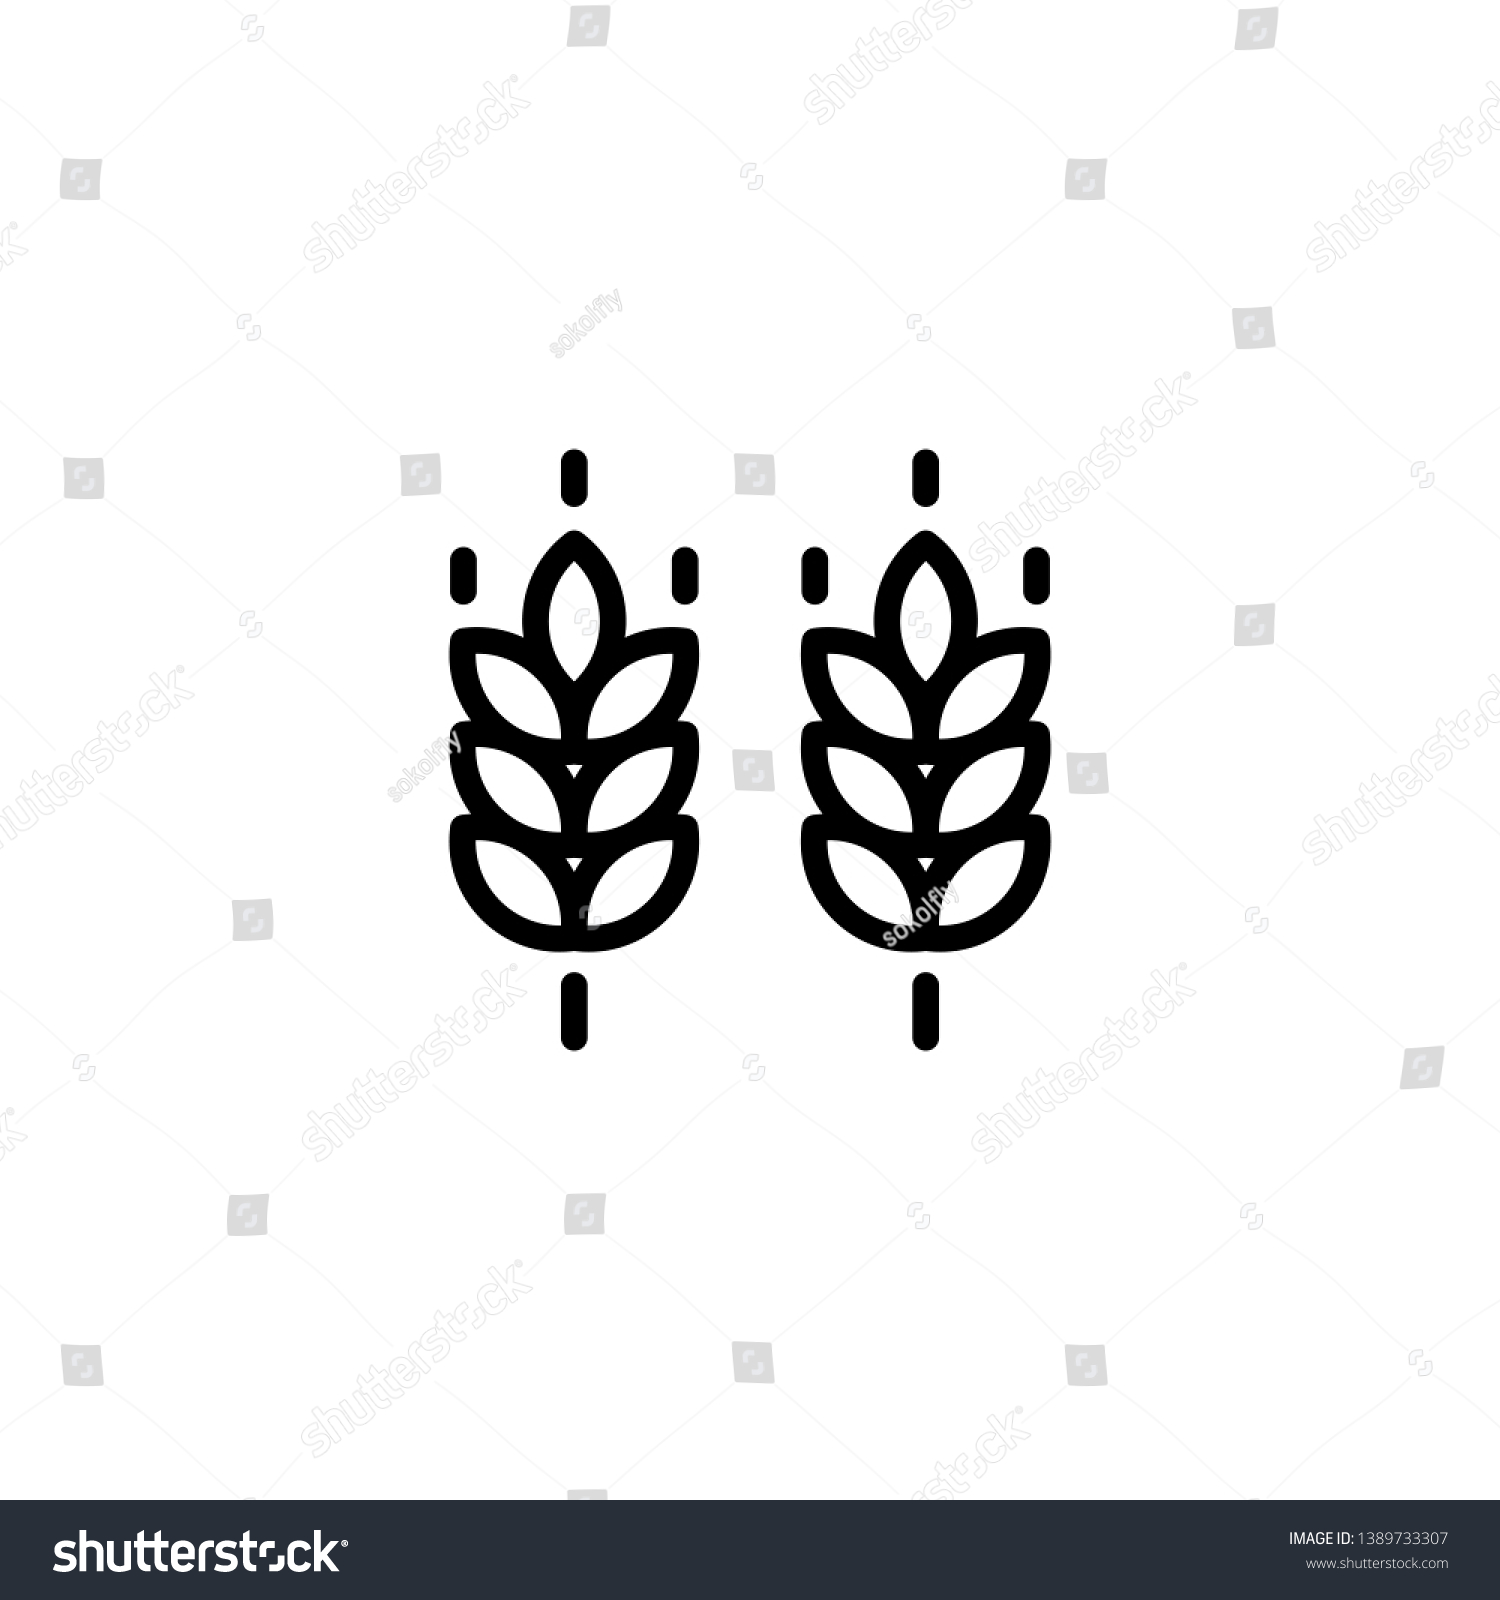 Vector farm wheat ears icon template. Line whole grain symbol illustration for organic eco business, agriculture, beer, bakery. Gluten free logo background #1389733307